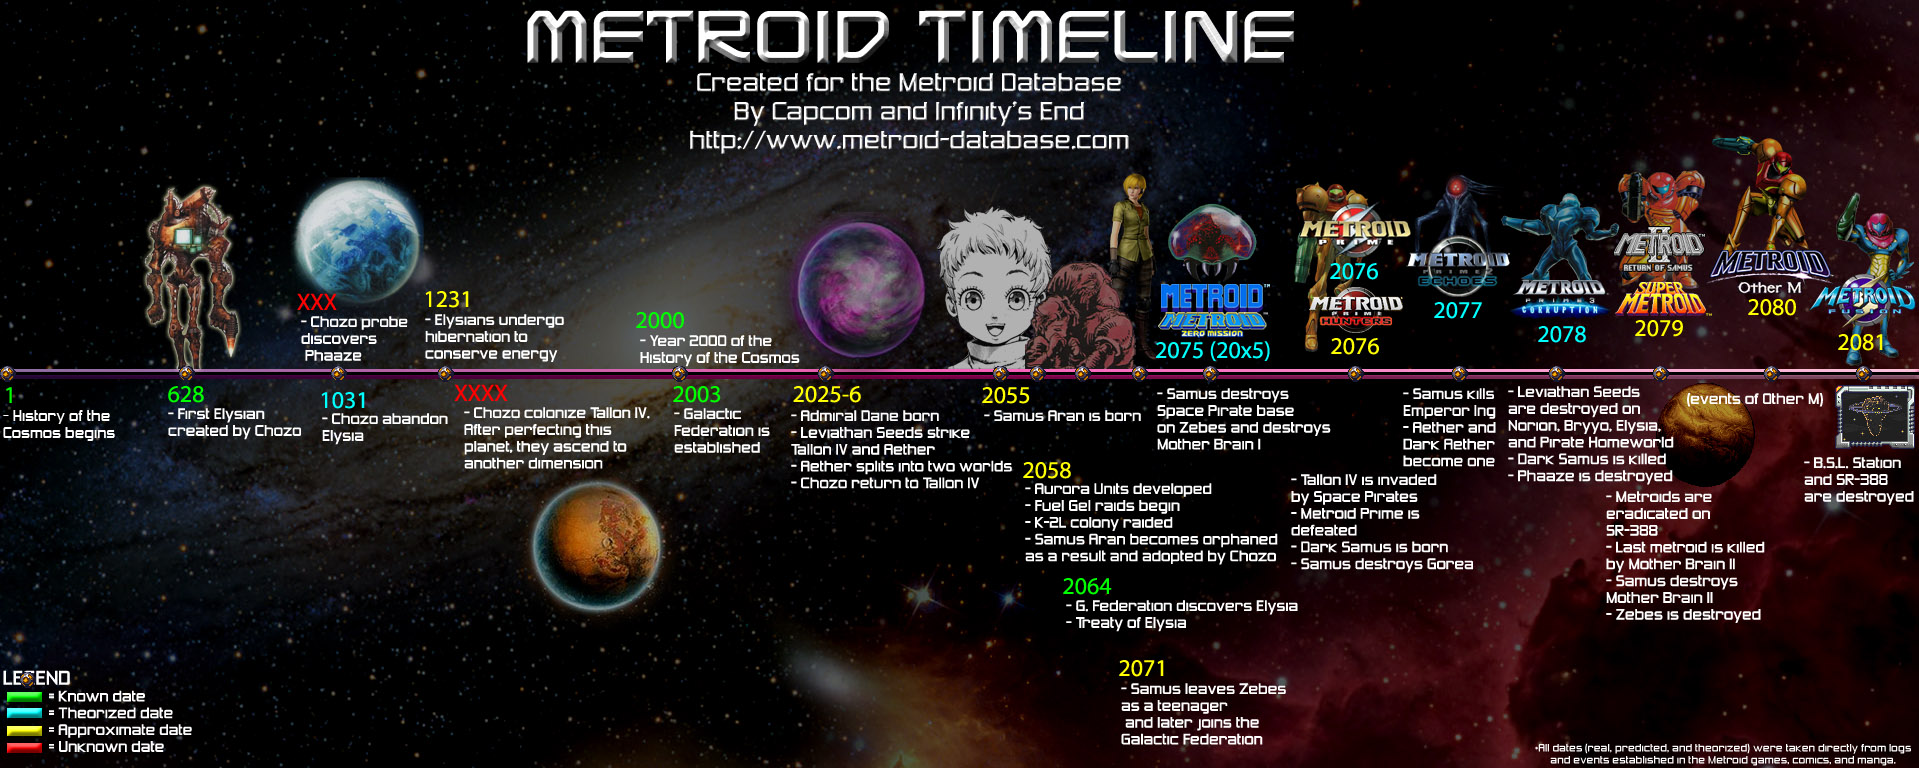 Geek insider, geekinsider, geekinsider. Com,, a brief look into the history of the metroid universe, gaming